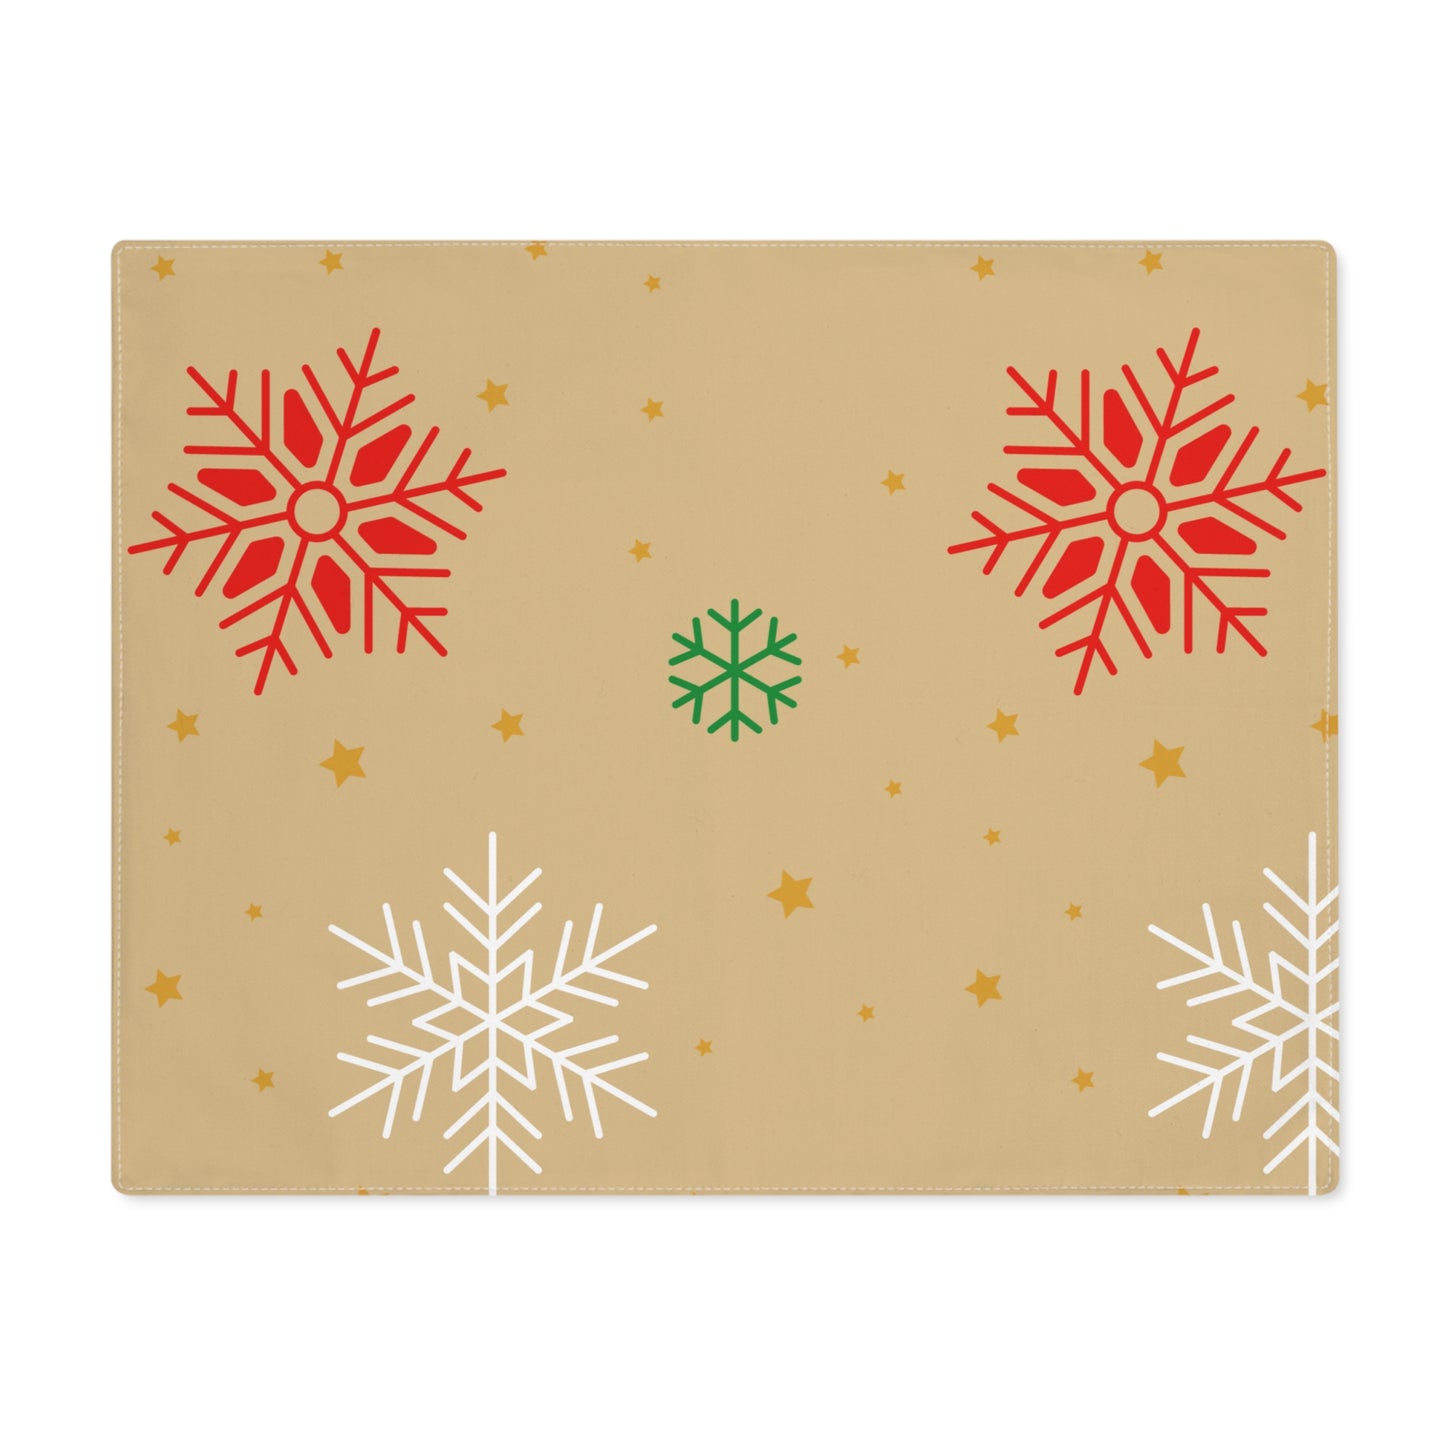 Red White and Green Snowflakes on Gold Christmas Placemat, 1pc